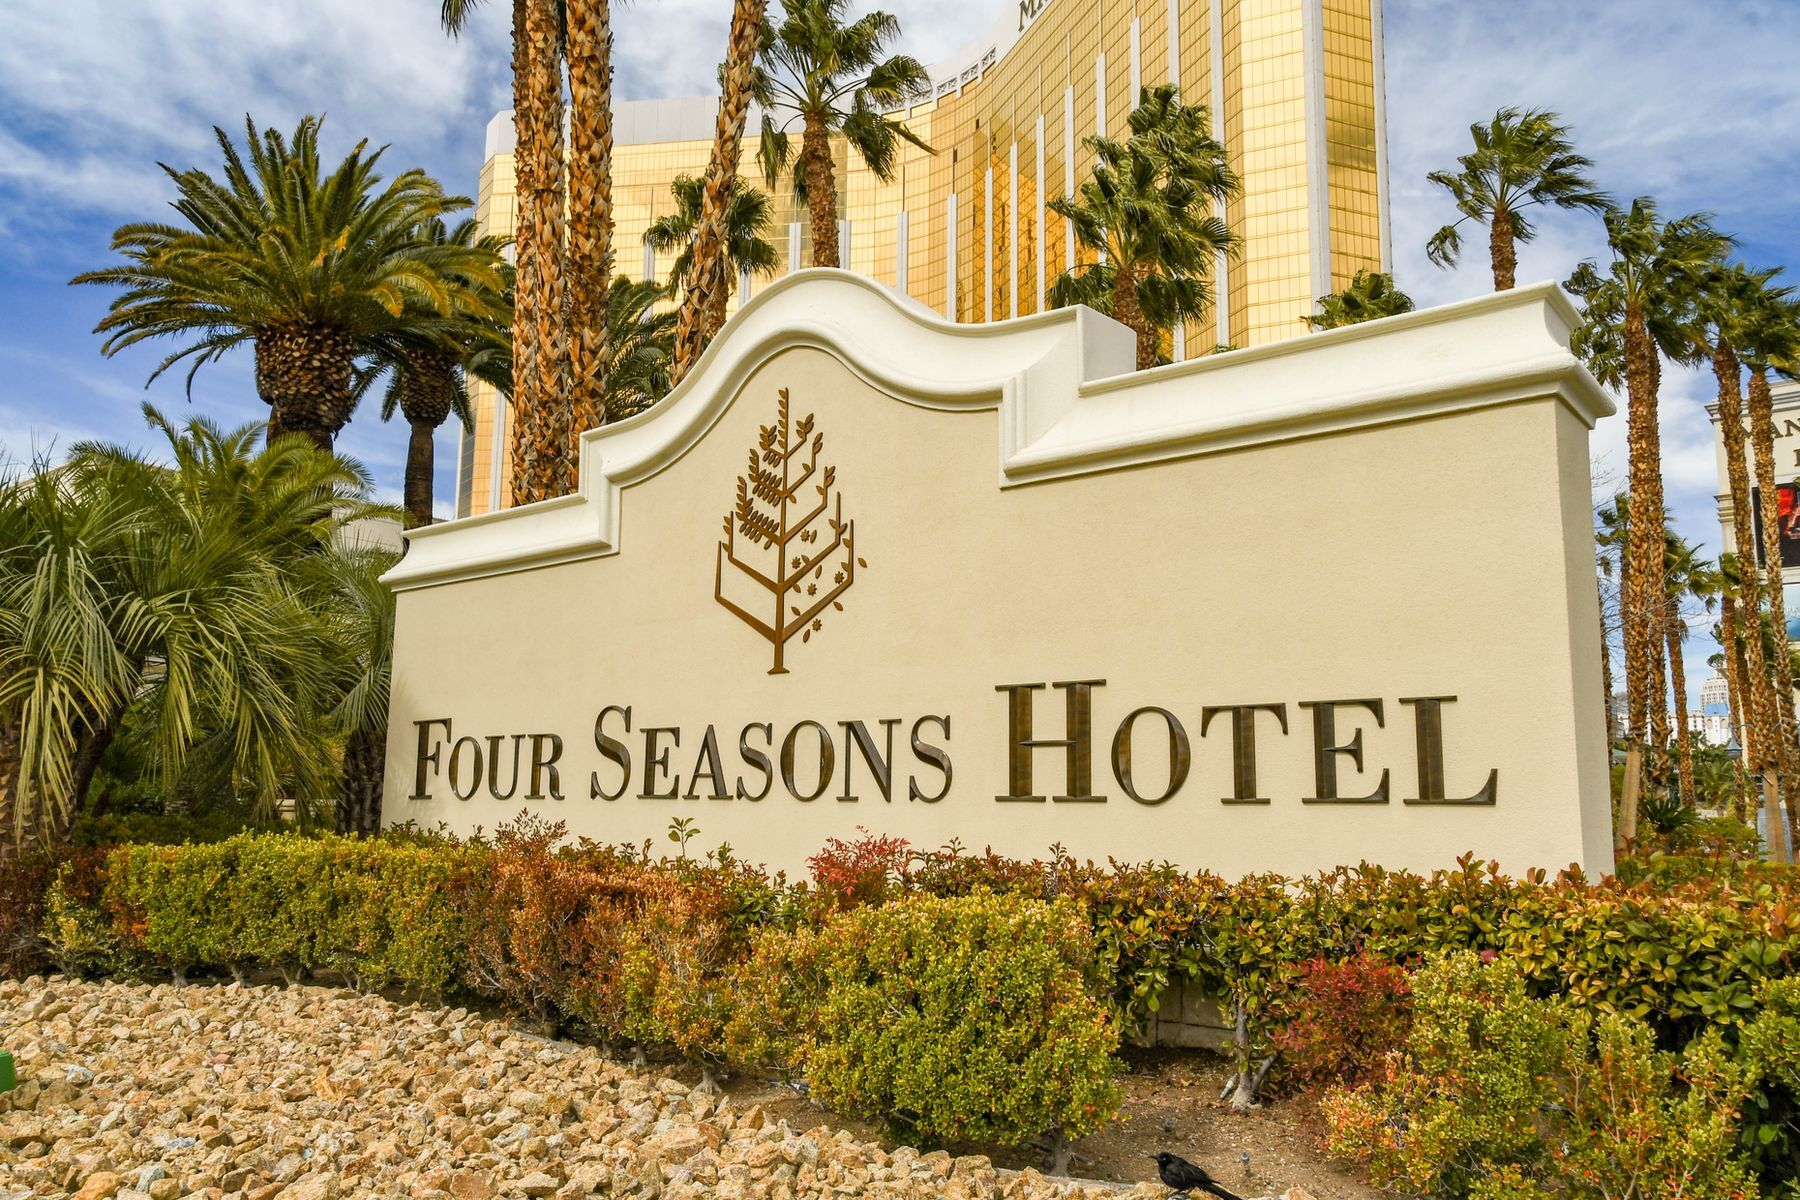 <p>Before it was part of an <a href="https://www.politico.com/news/2021/08/02/trump-campaign-four-seasons-landscaping-fixation-502163">international punchline</a> thanks to a Donald Trump campaign press conference, Four Seasons was already known as a global luxury brand. Headquartered in Toronto, Canada, Four Seasons locations consist of five-star hotels or resorts with a number of high-end offerings including fine dining, golfing and spas. In total, the brand boasts <a href="https://www.fourseasons.com/find_a_hotel_or_resort/" rel="noreferrer noopener">129 locations worldwide</a>, including 52 in North America.</p>